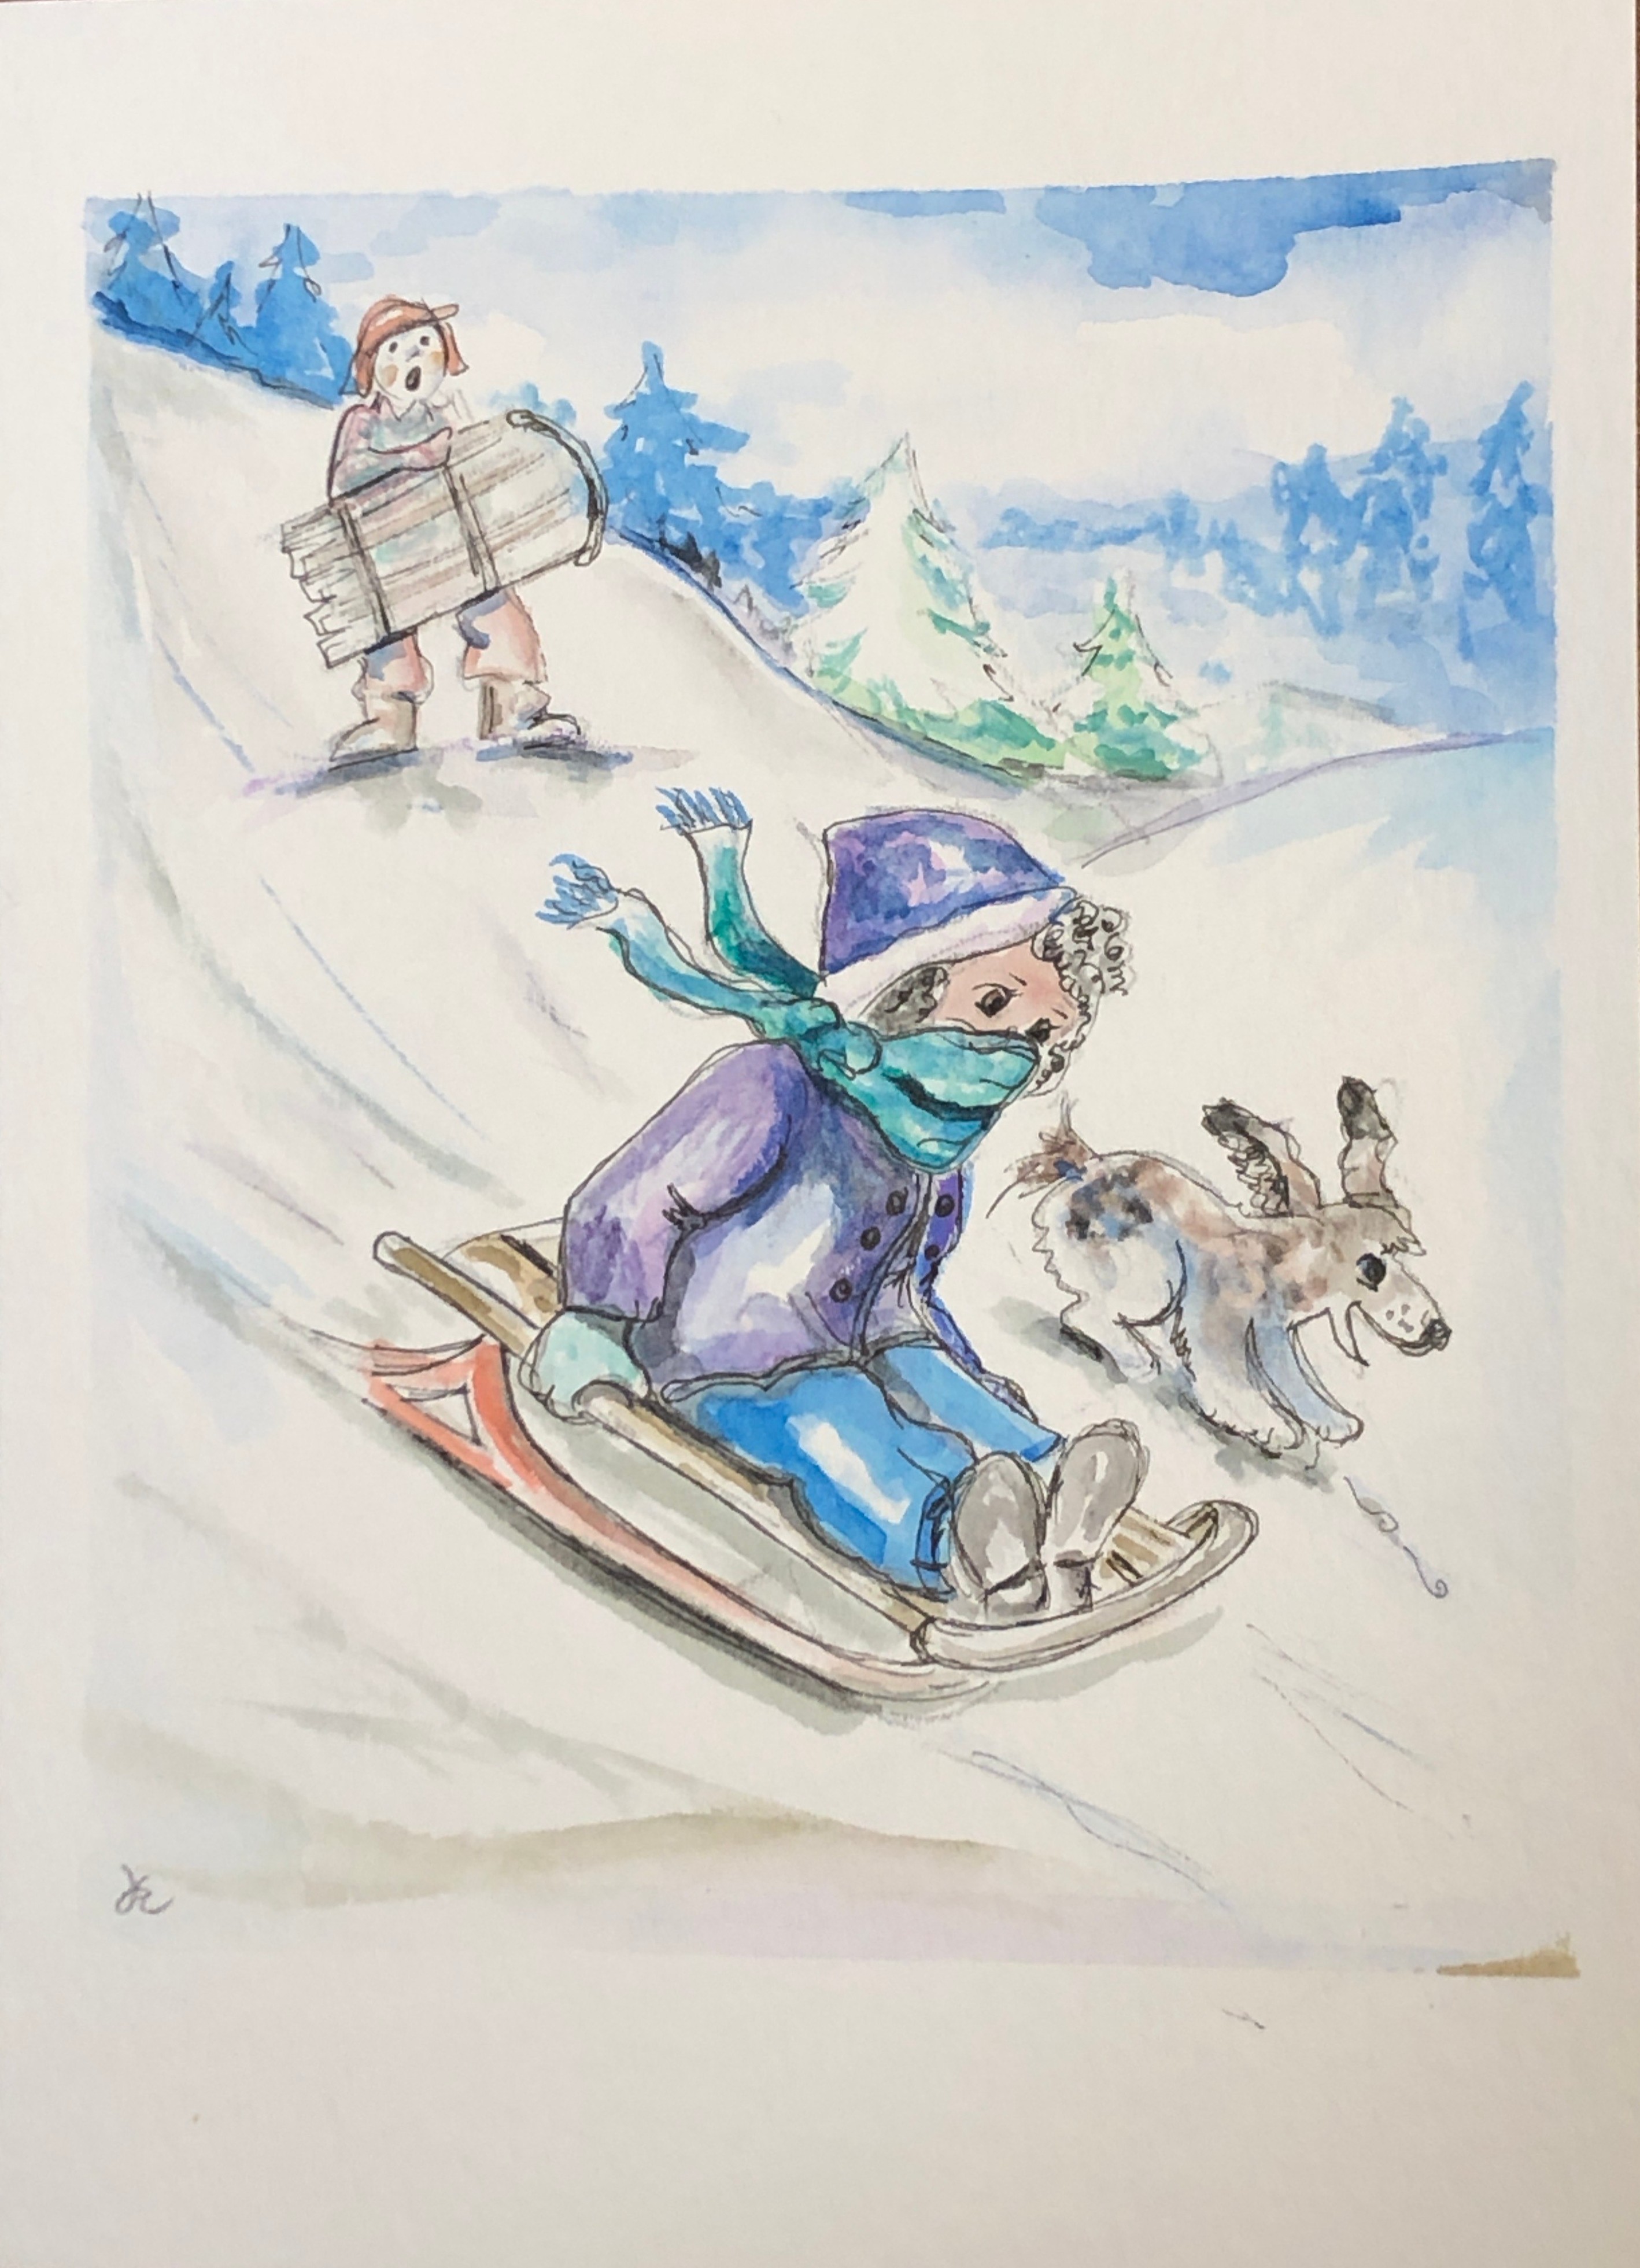 Girl riding a sled down a wintery hill. Line and wash watercolor 